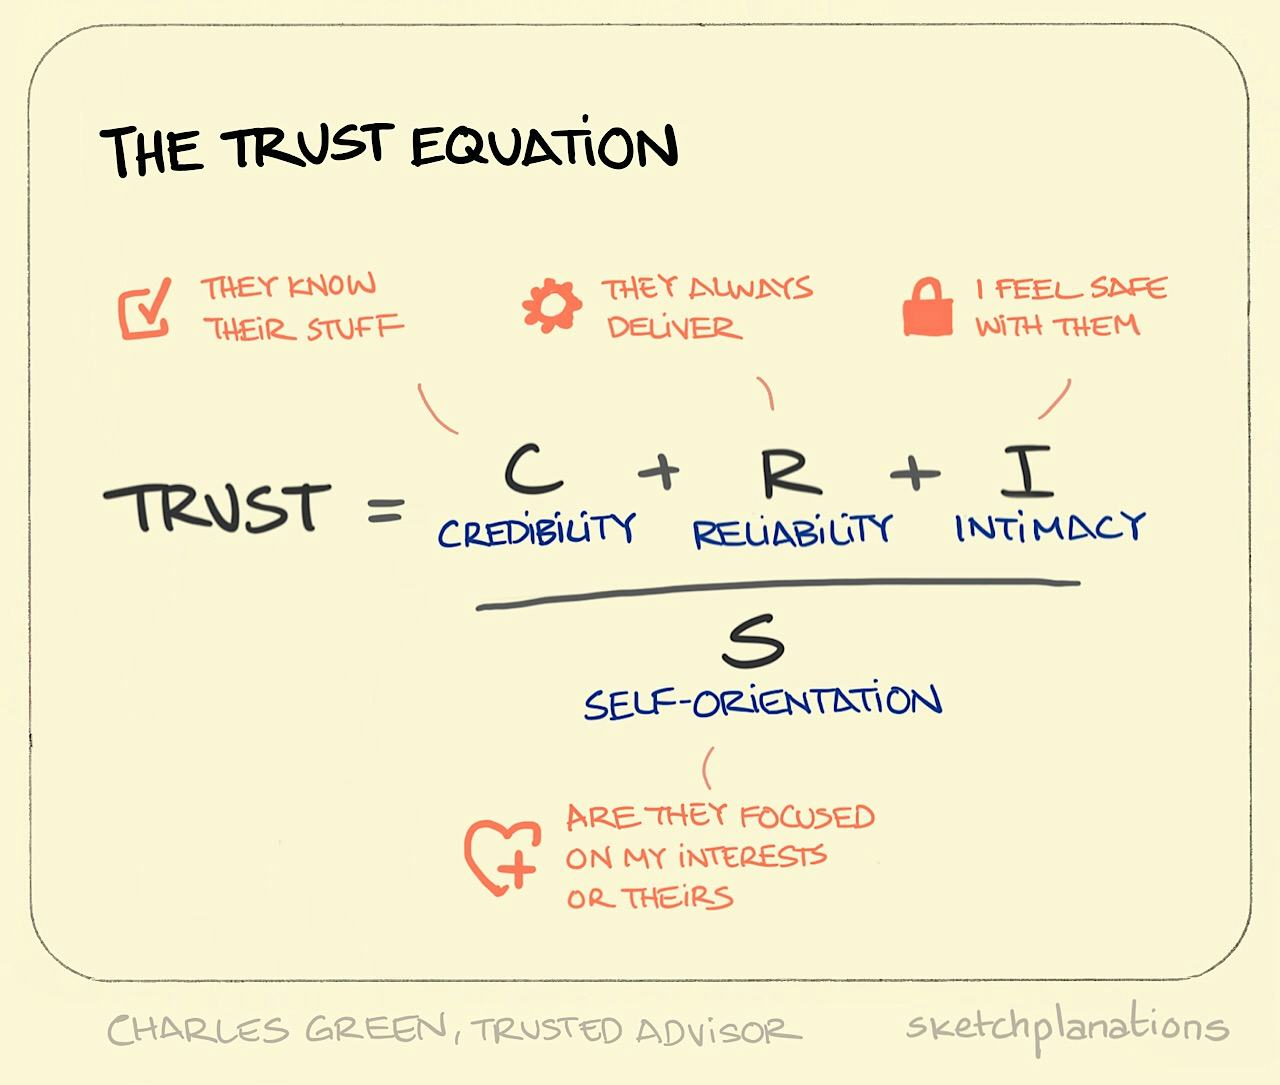 The trust equation - Sketchplanations